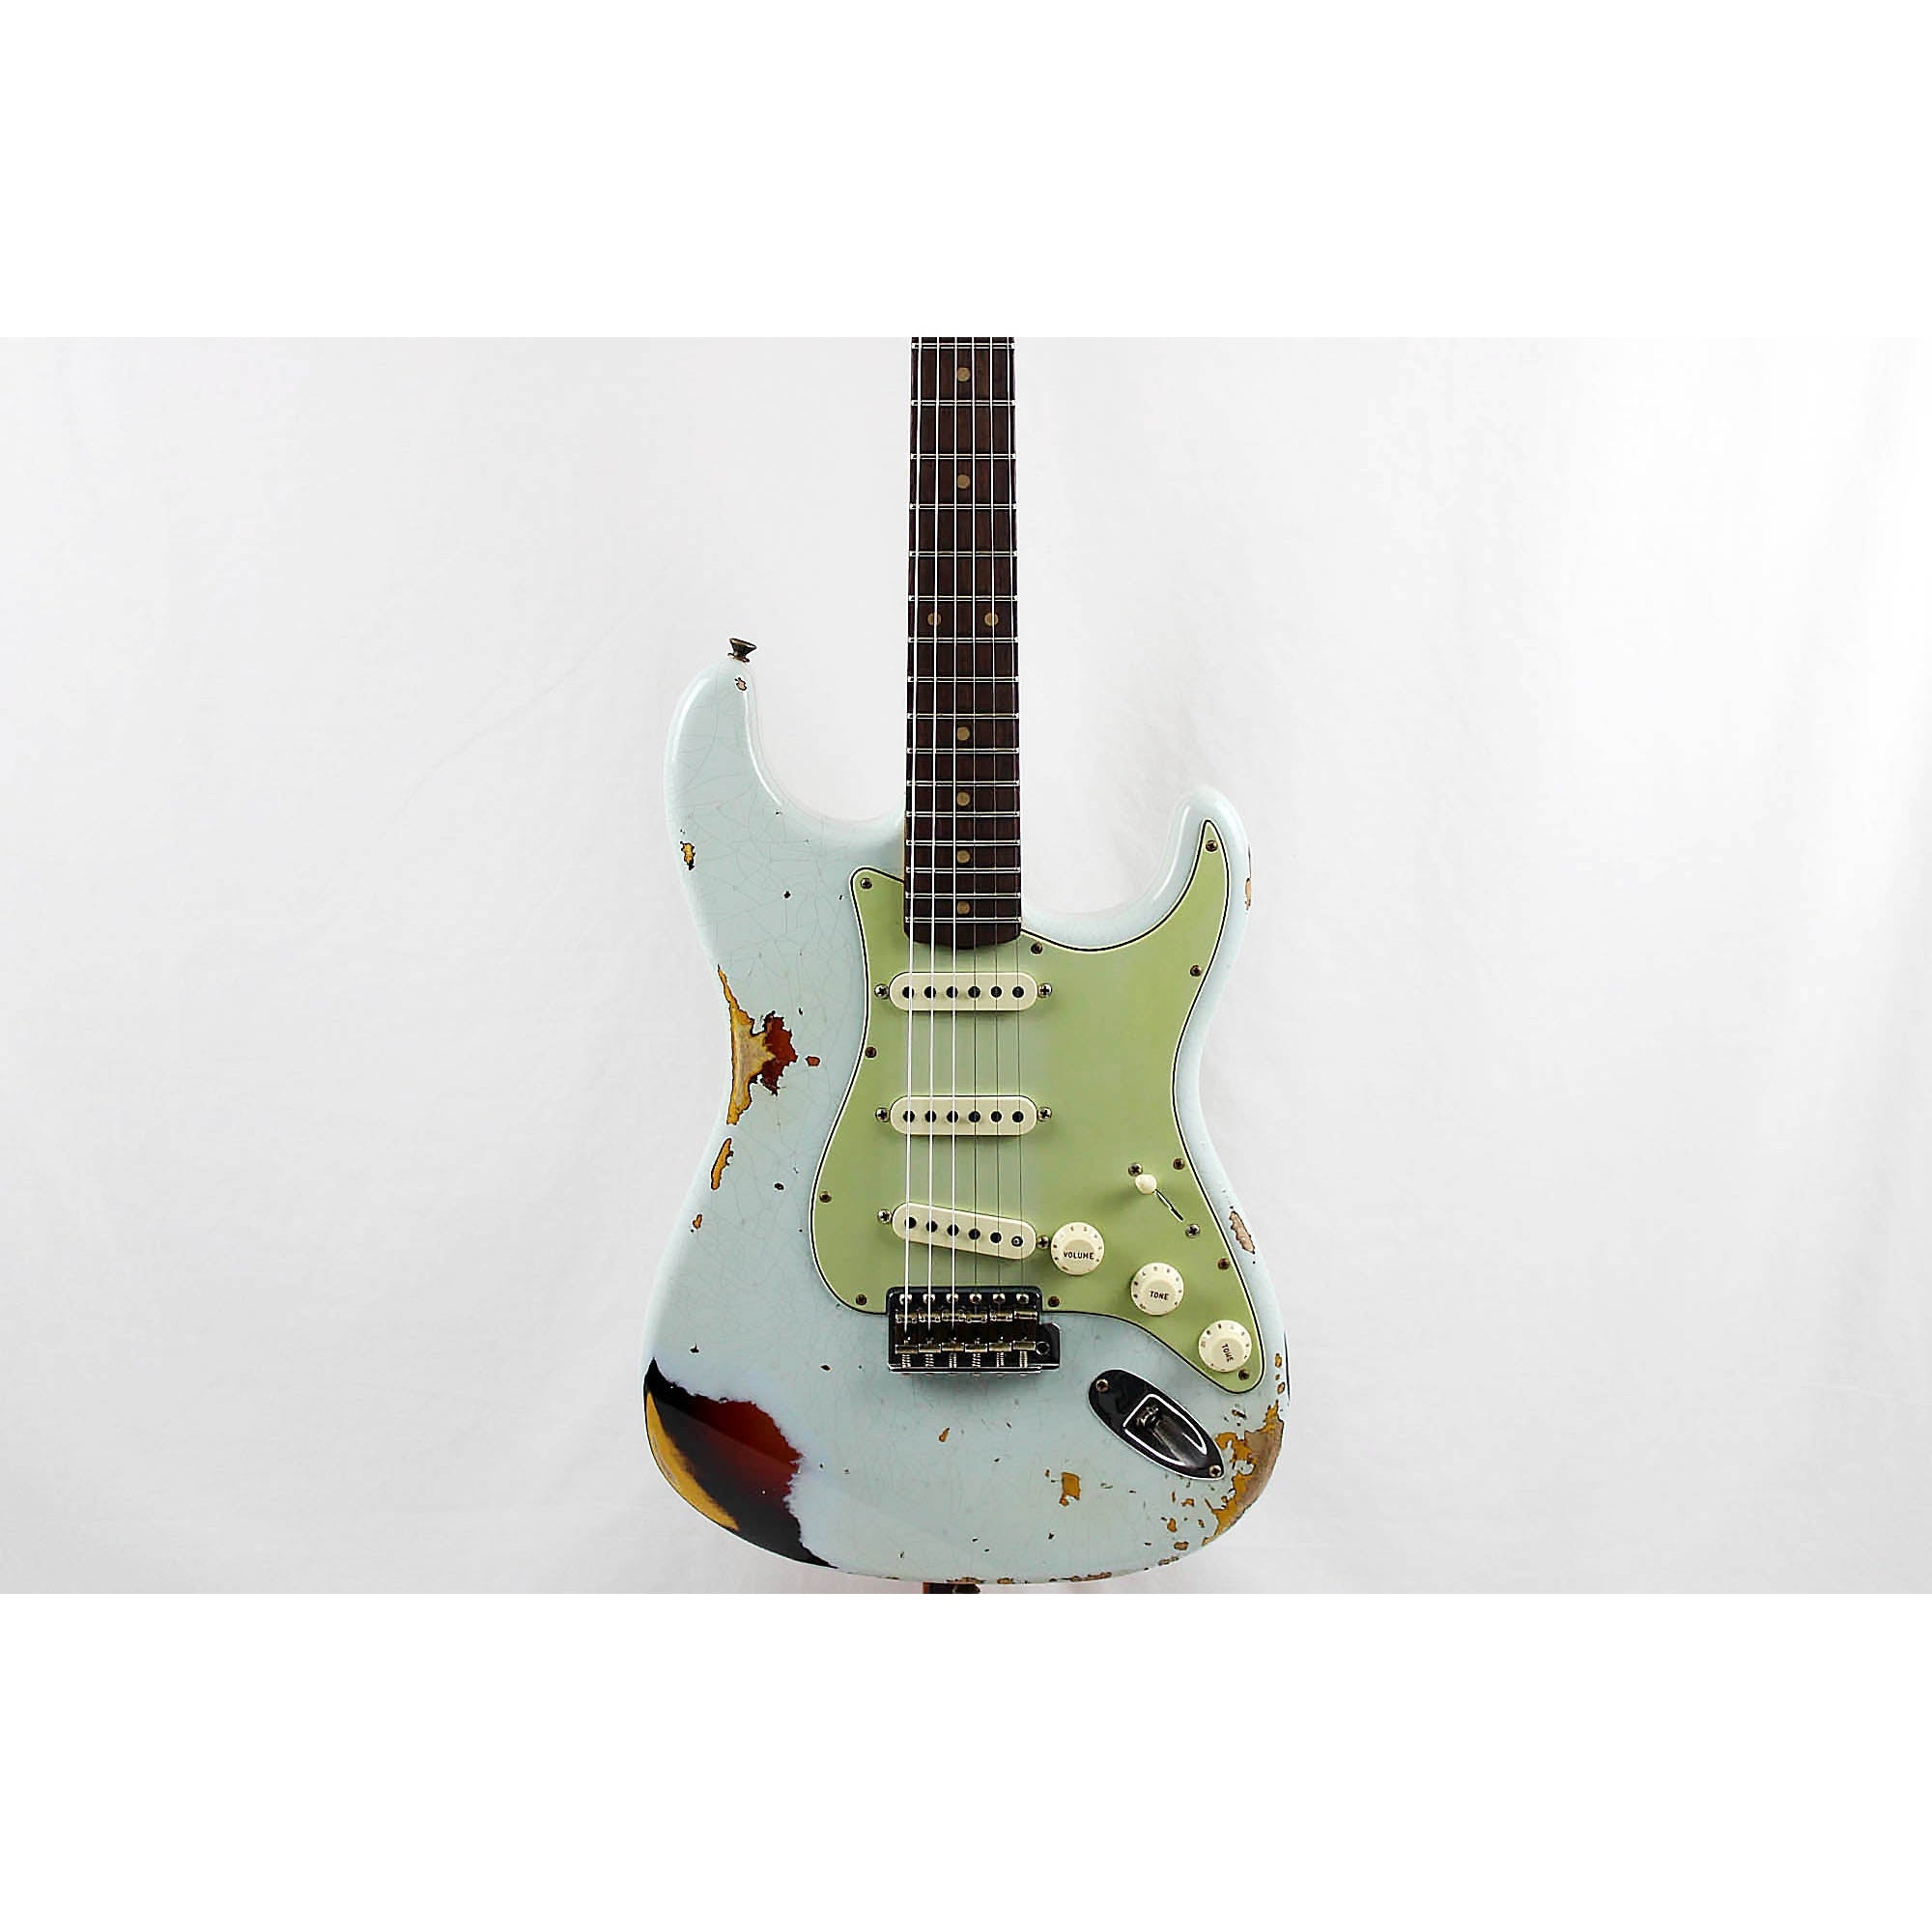 Fender Custom Shop Limited Edition 62 Stratocaster Heavy Relic - Faded Aged  Sonic Blue over 3 Tone Sunburst